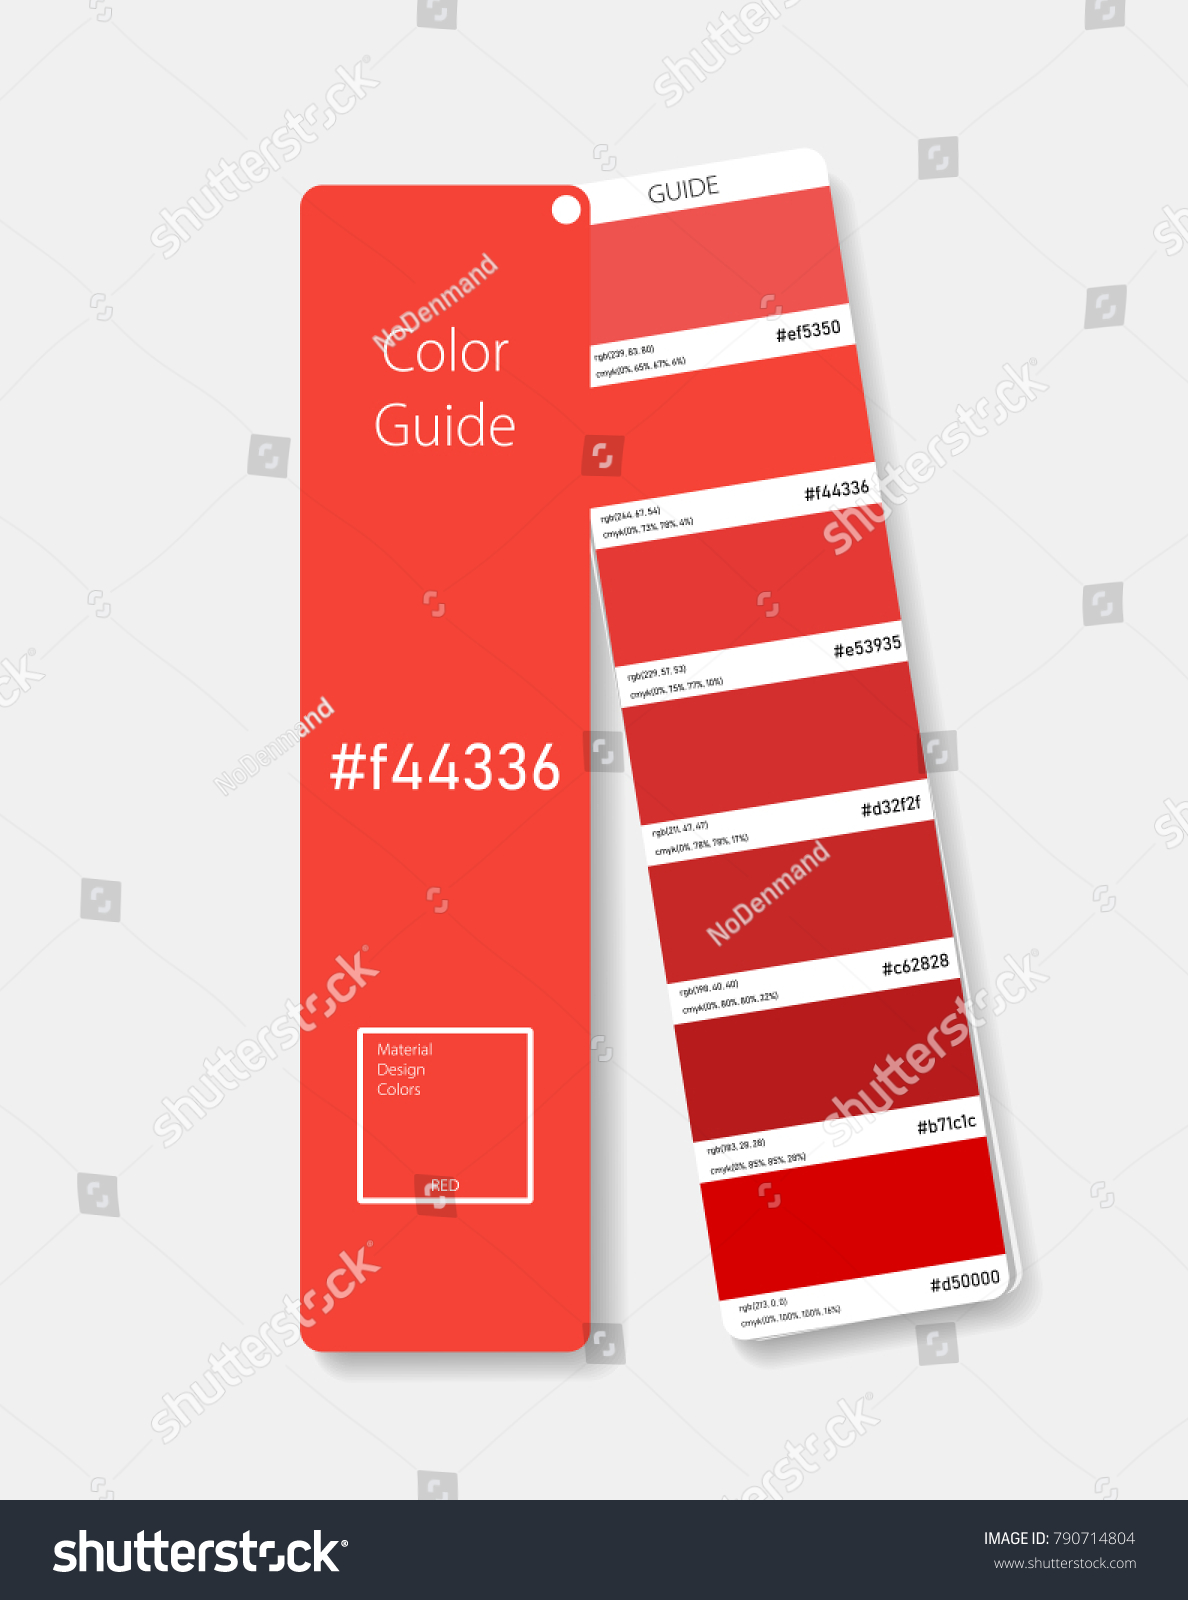 Material Design Colors Color Swatch Concept Stock Vector (Royalty Free ...